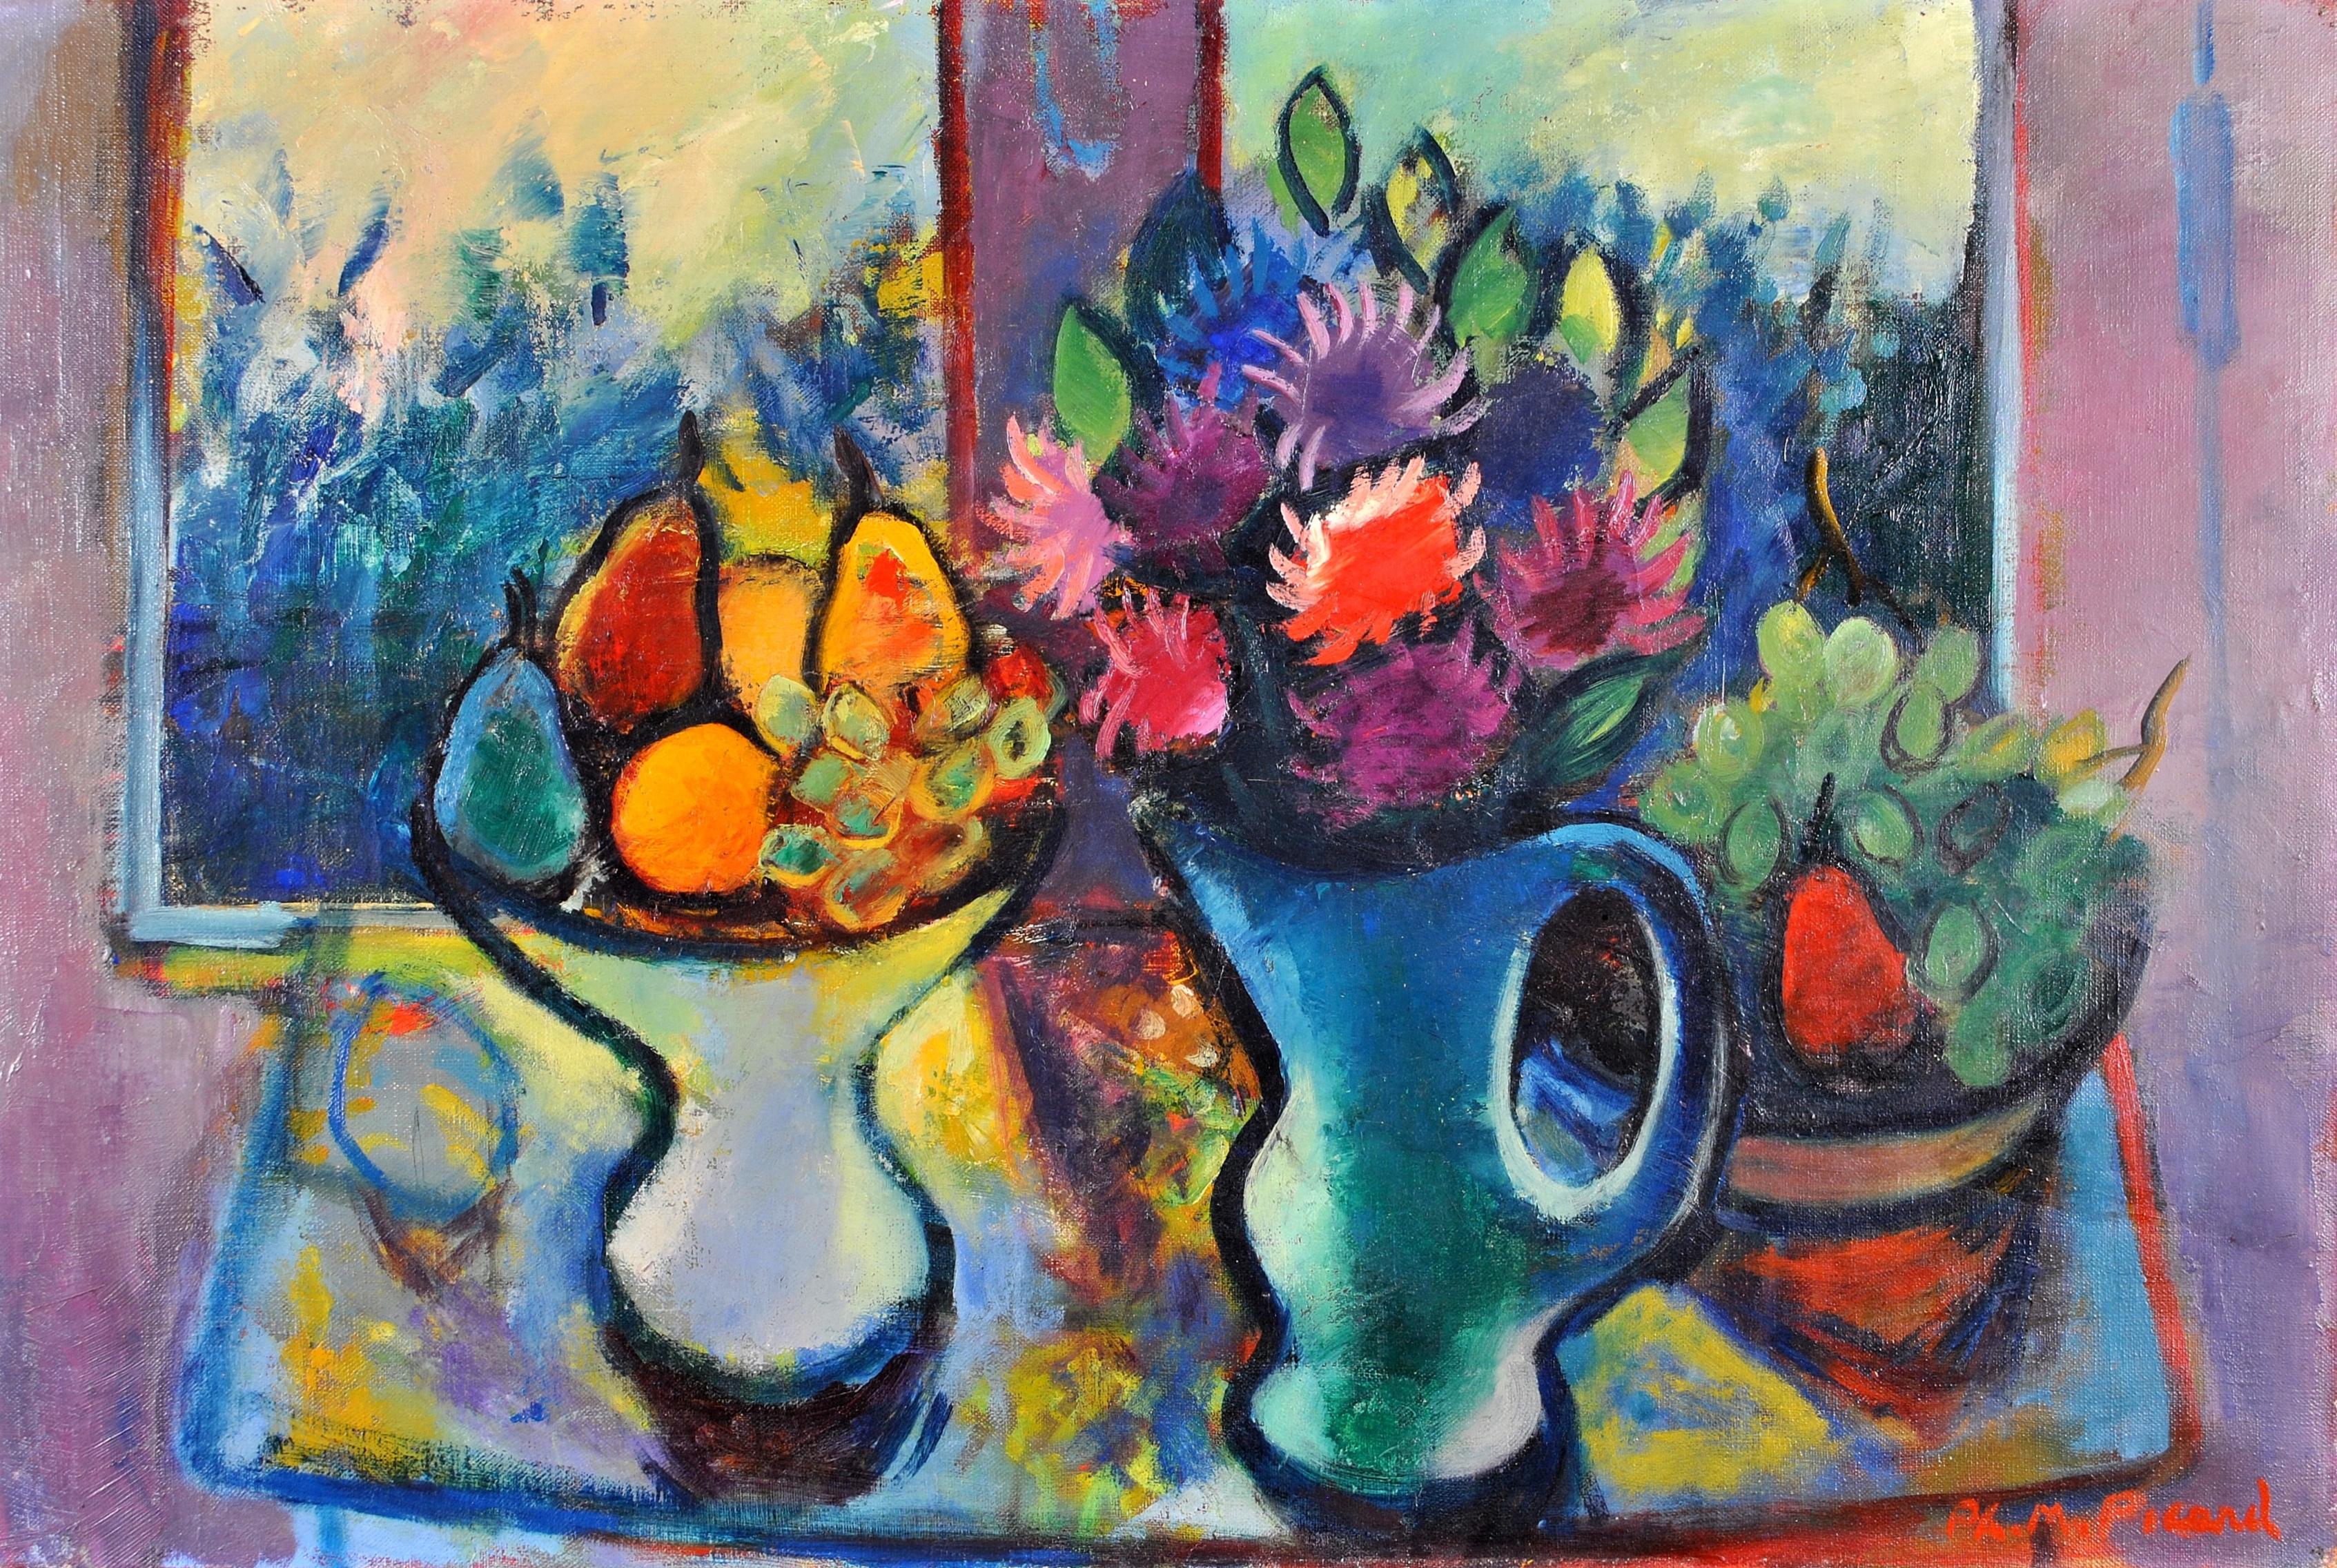 A beautiful 1950's French expressionist oil on canvas depicting flowers and fruits in a window by Philippe Marie René Picard. Bright and colourful still life on a good scale. Signed lower right.

Artist: Philippe Marie René Picard (French,